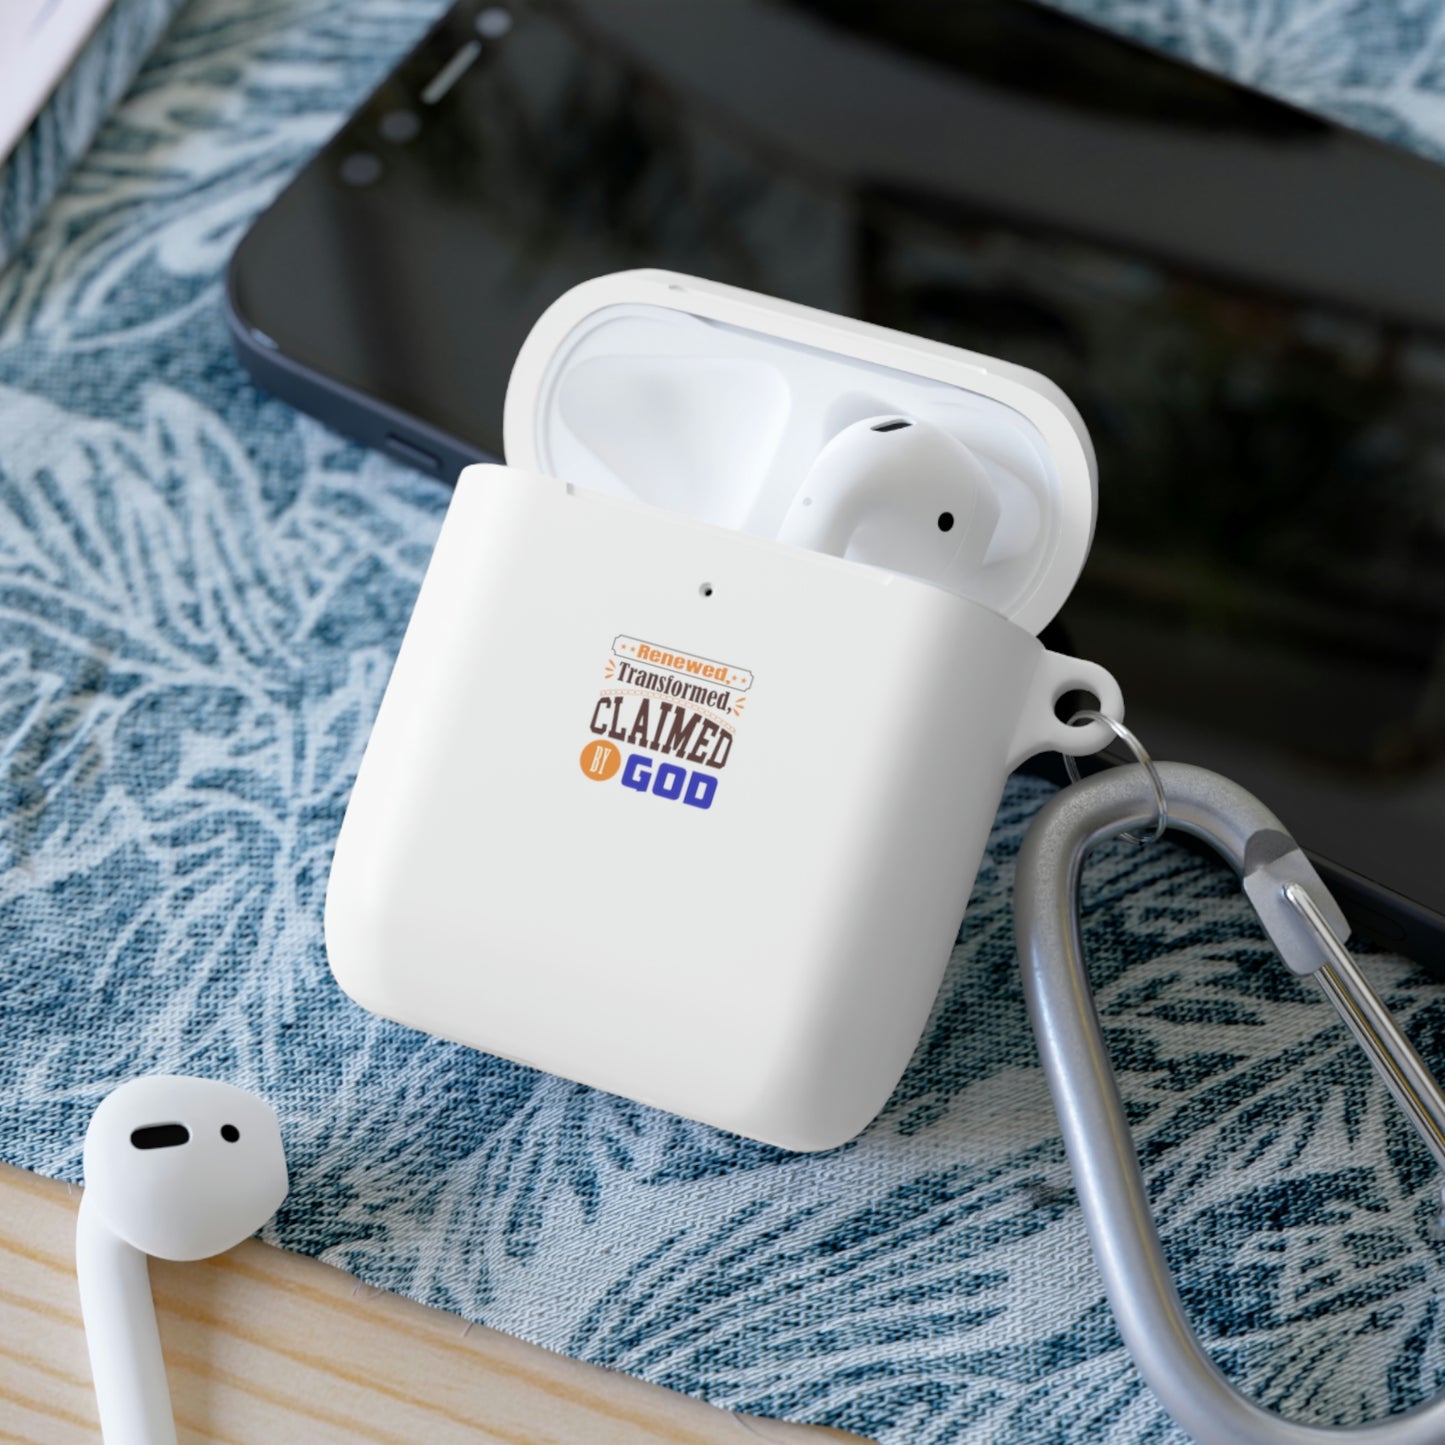 Renewed, Transformed, Claimed By God AirPods / Airpods Pro Case cover